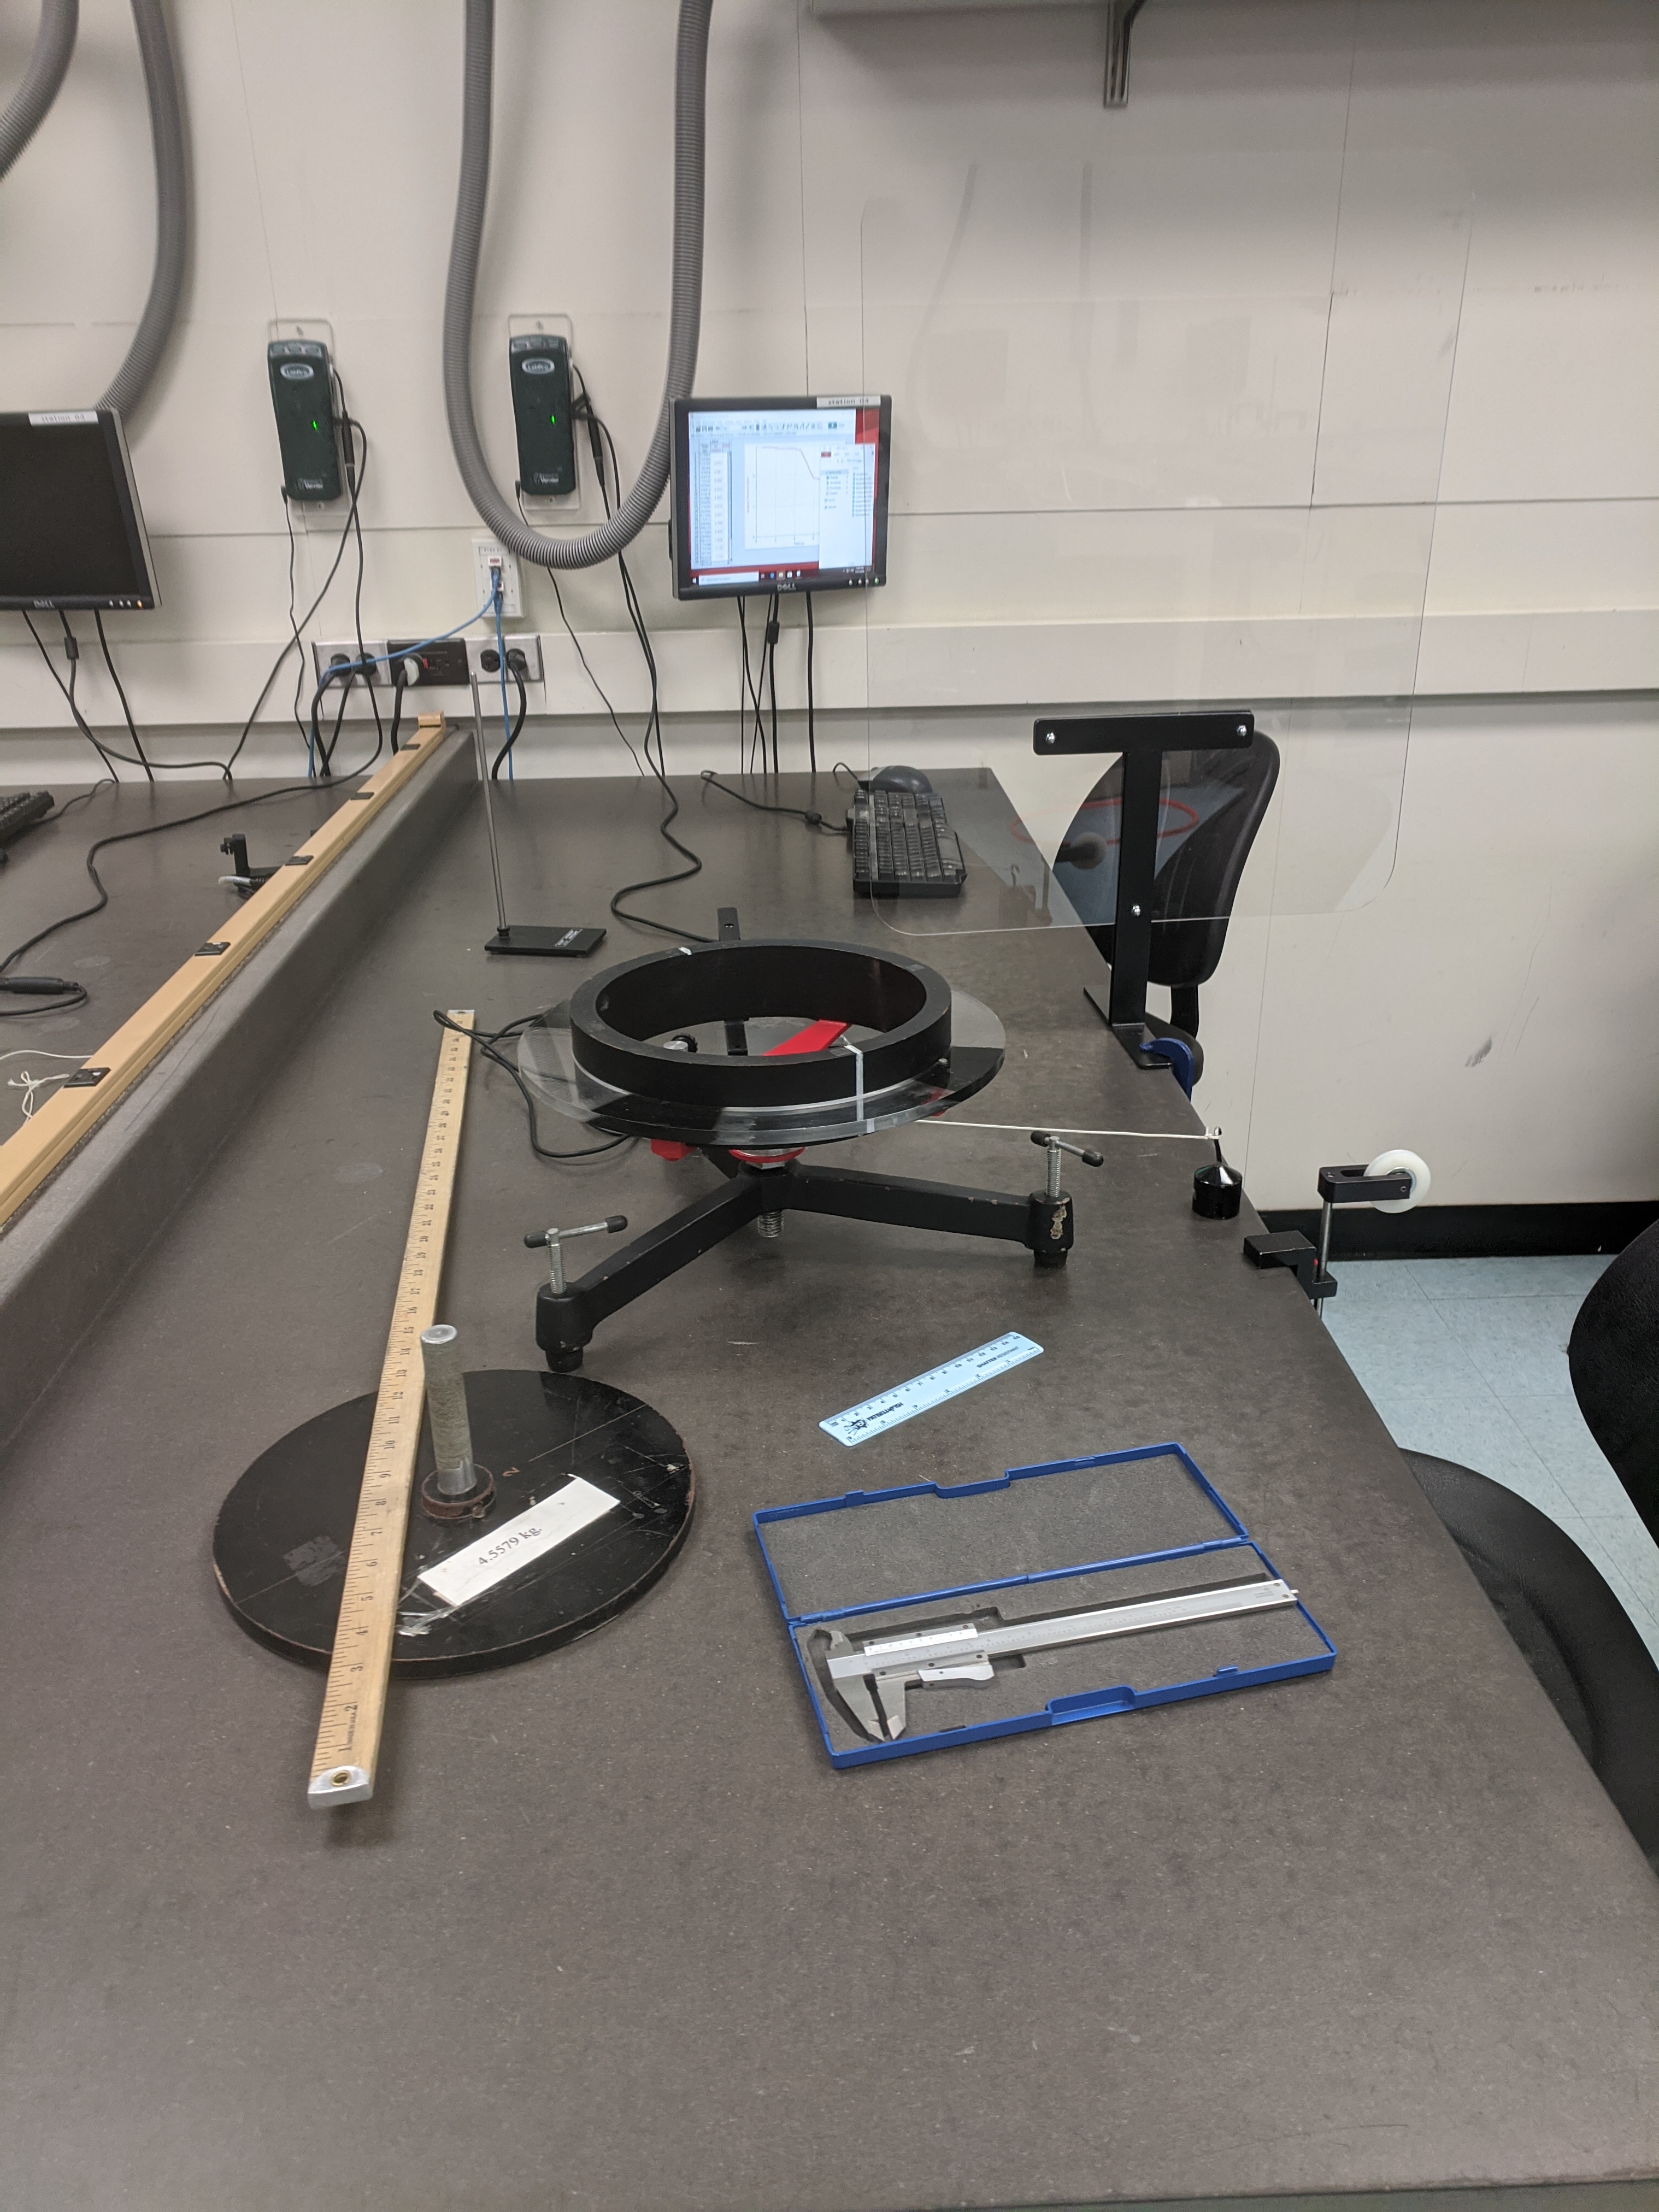 Lab bench showing Angular Momentum experiment and protective shield